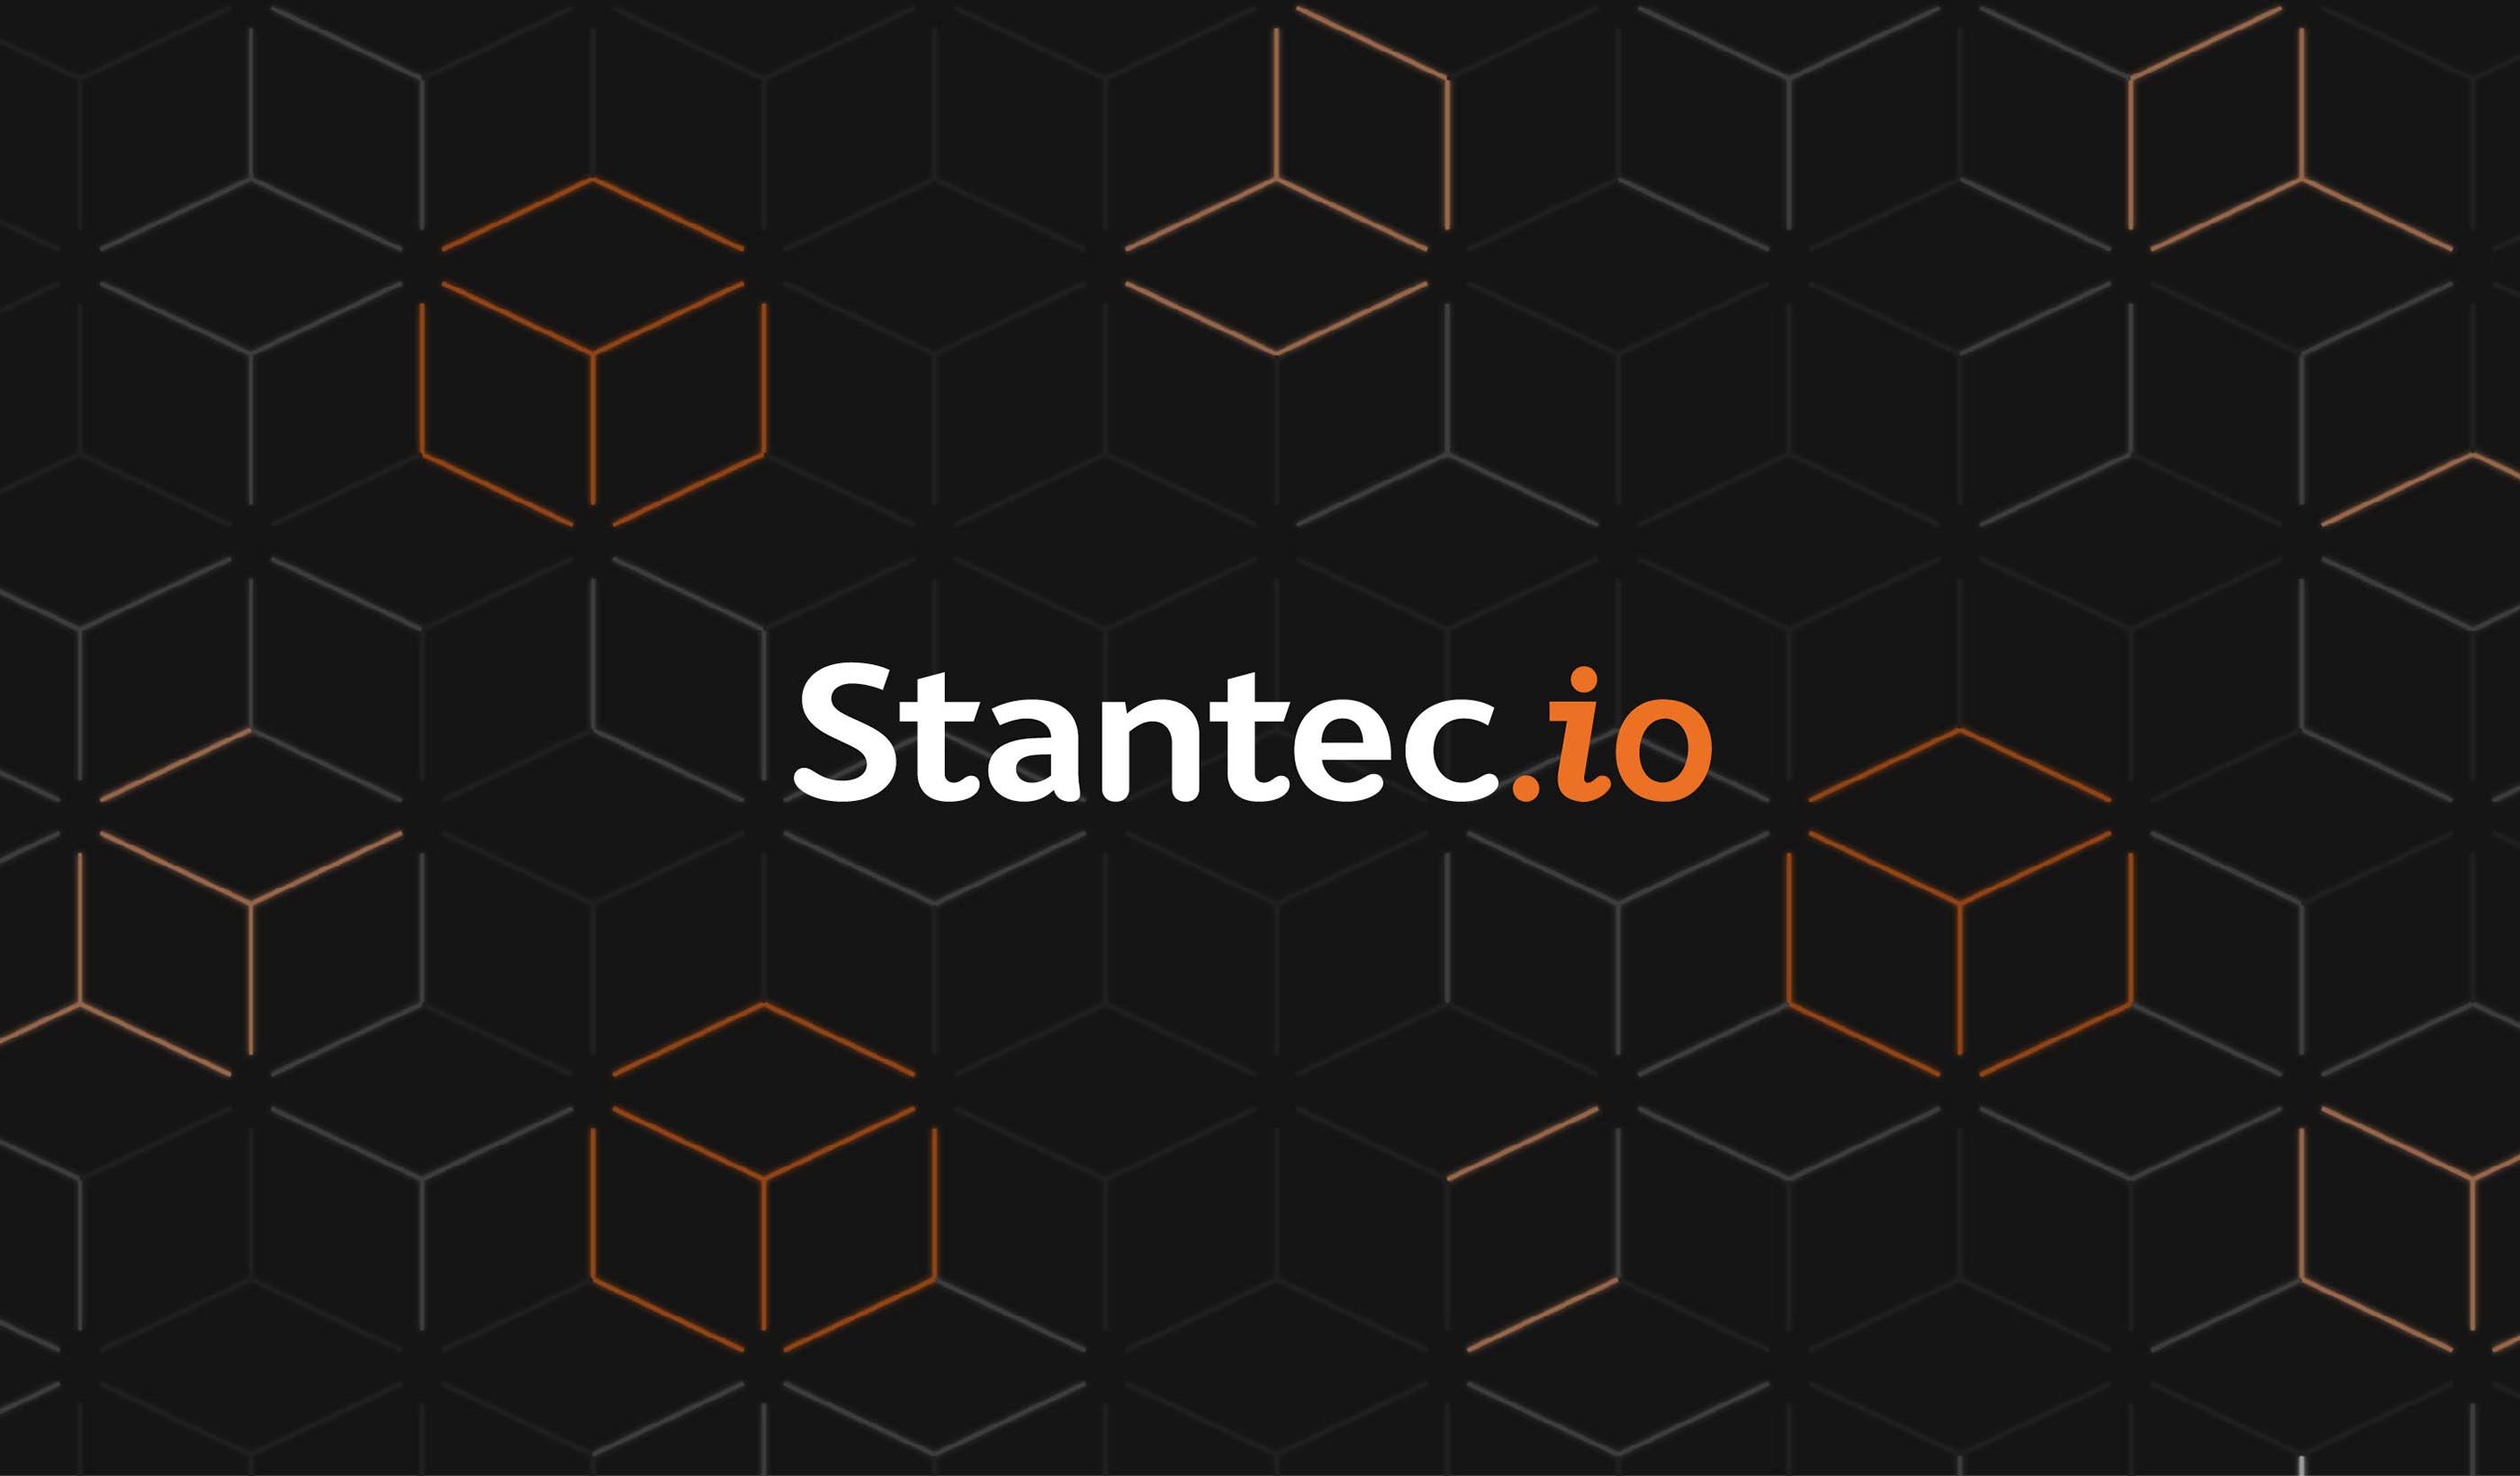 What is Stantec.io?